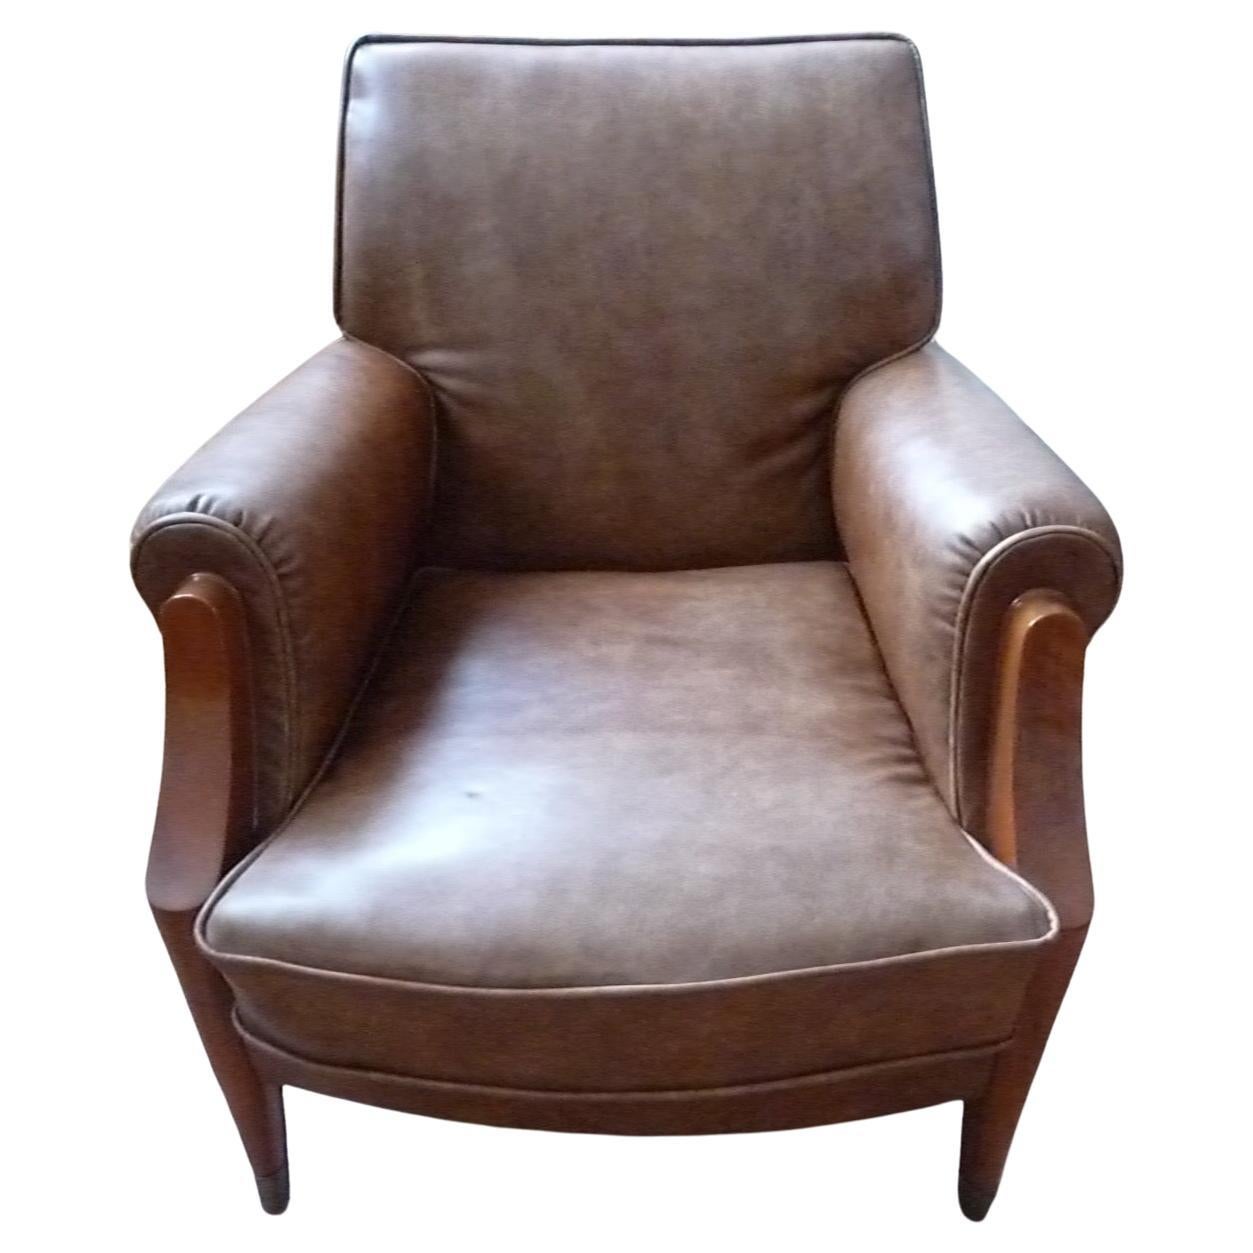 Single French Art Déco Club Chair by Baptistin Spade. 1930s. For Sale